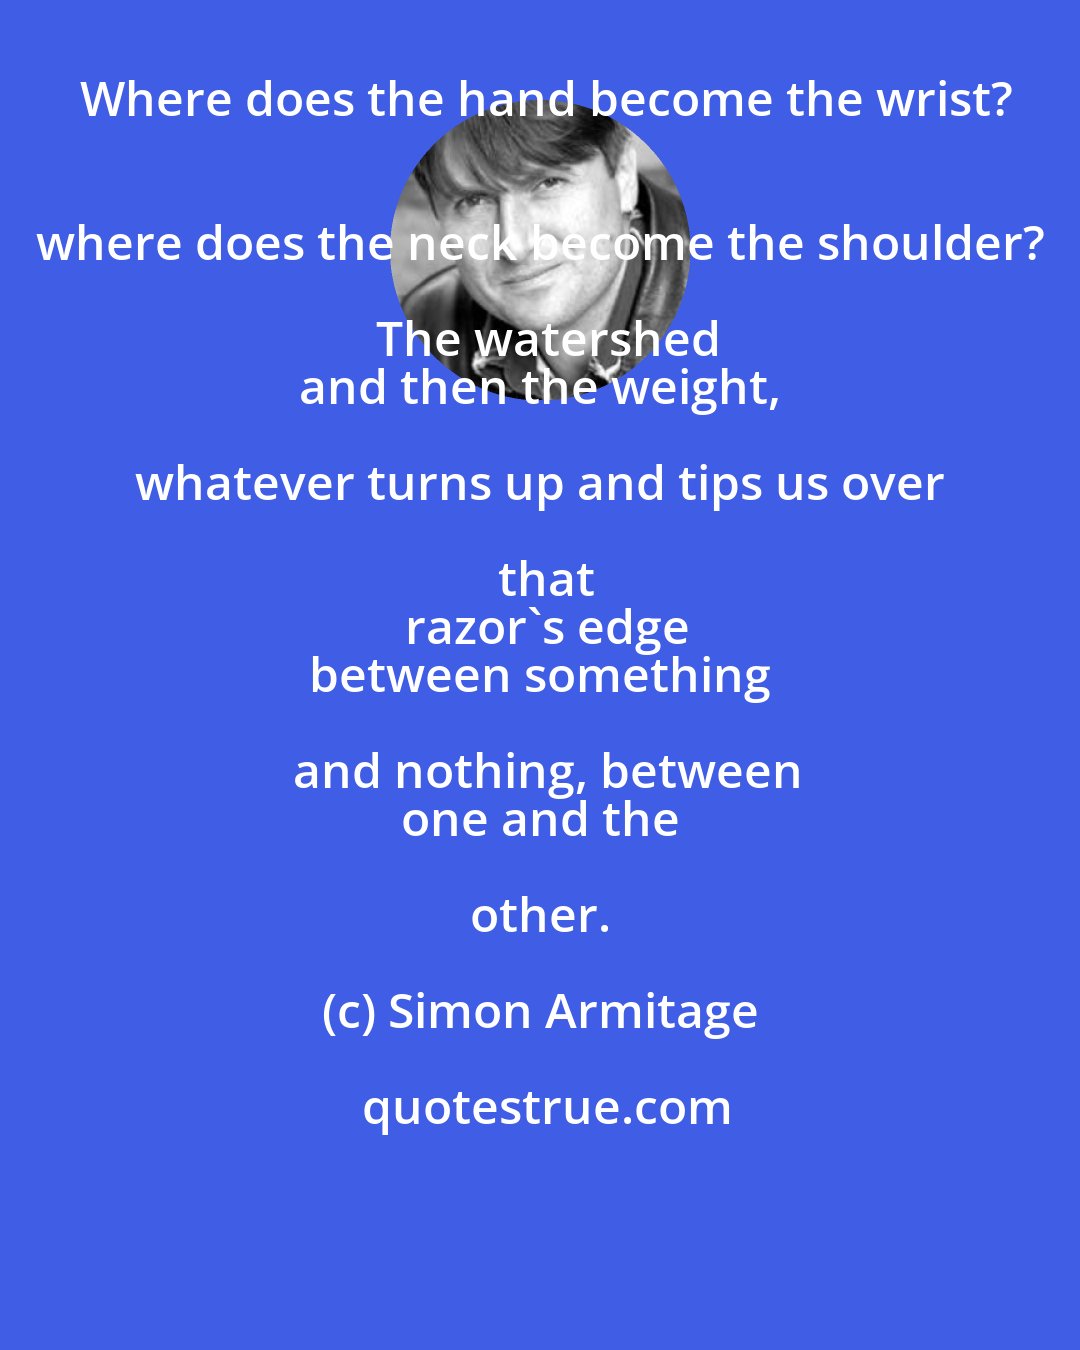 Simon Armitage: Where does the hand become the wrist?
 where does the neck become the shoulder? The watershed
 and then the weight, whatever turns up and tips us over that
 razor's edge
 between something and nothing, between
 one and the other.